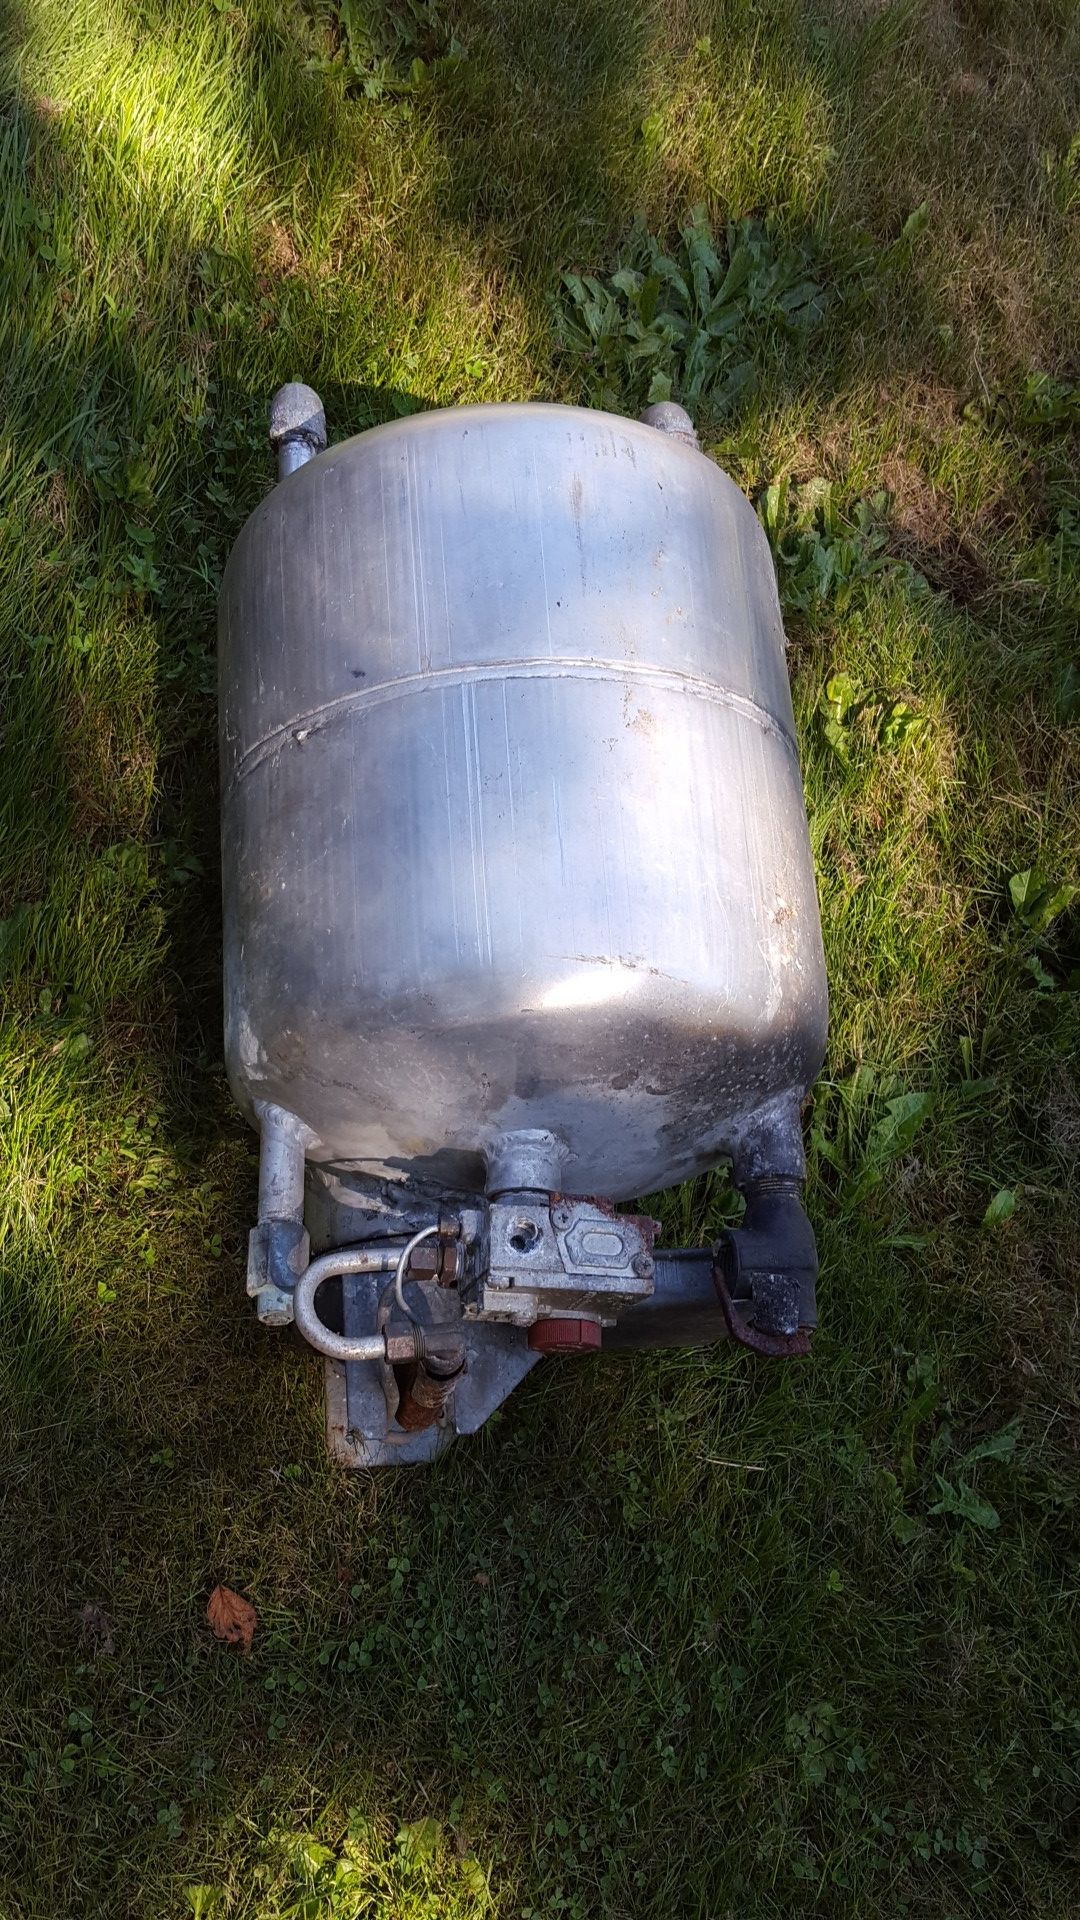 Aluminum propane hot water tank for your camper / travel trailer